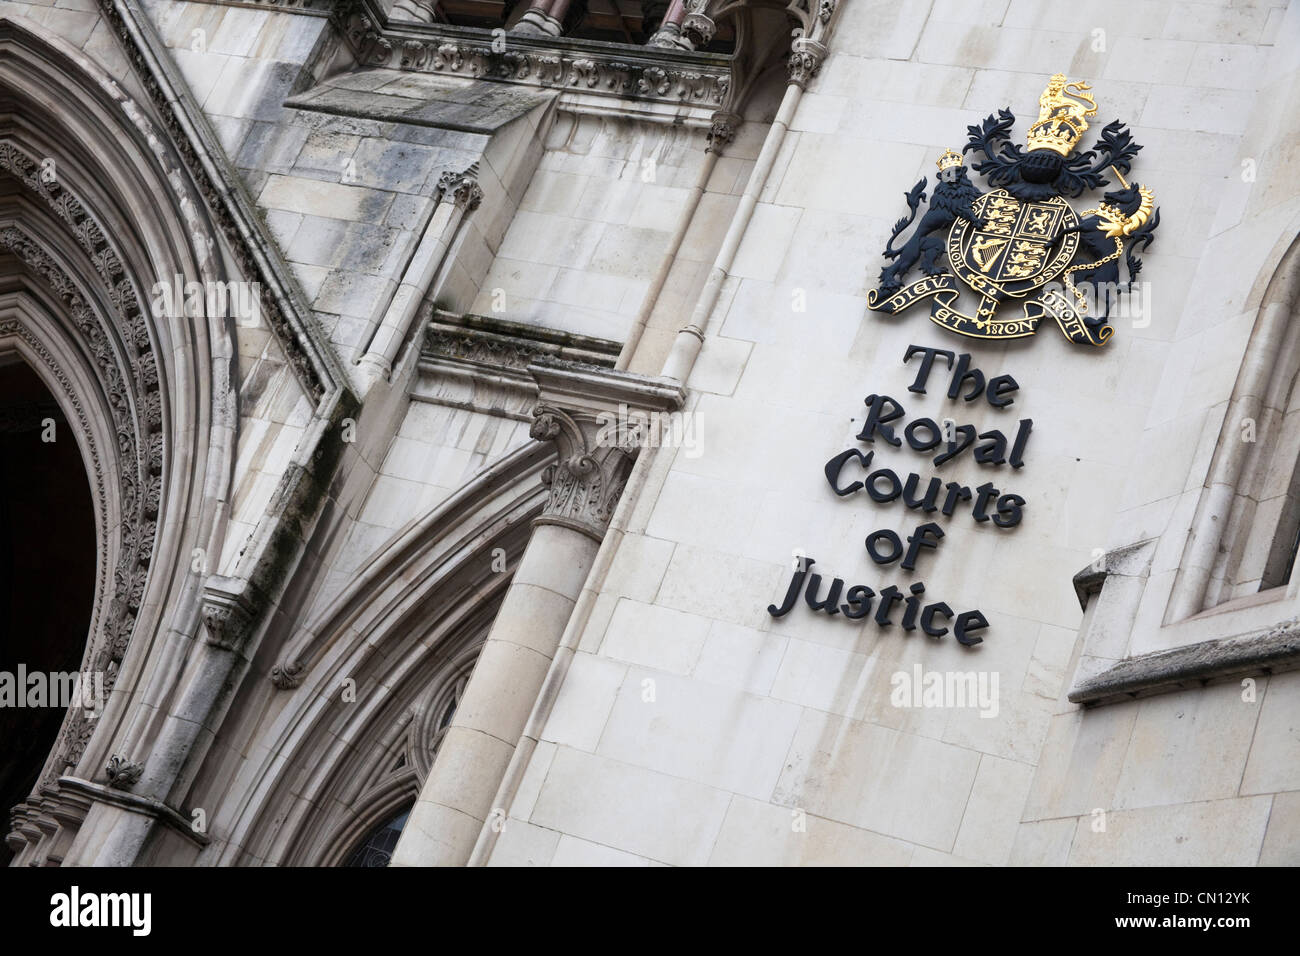 Royal Courts of Justice, London, UK Stockfoto